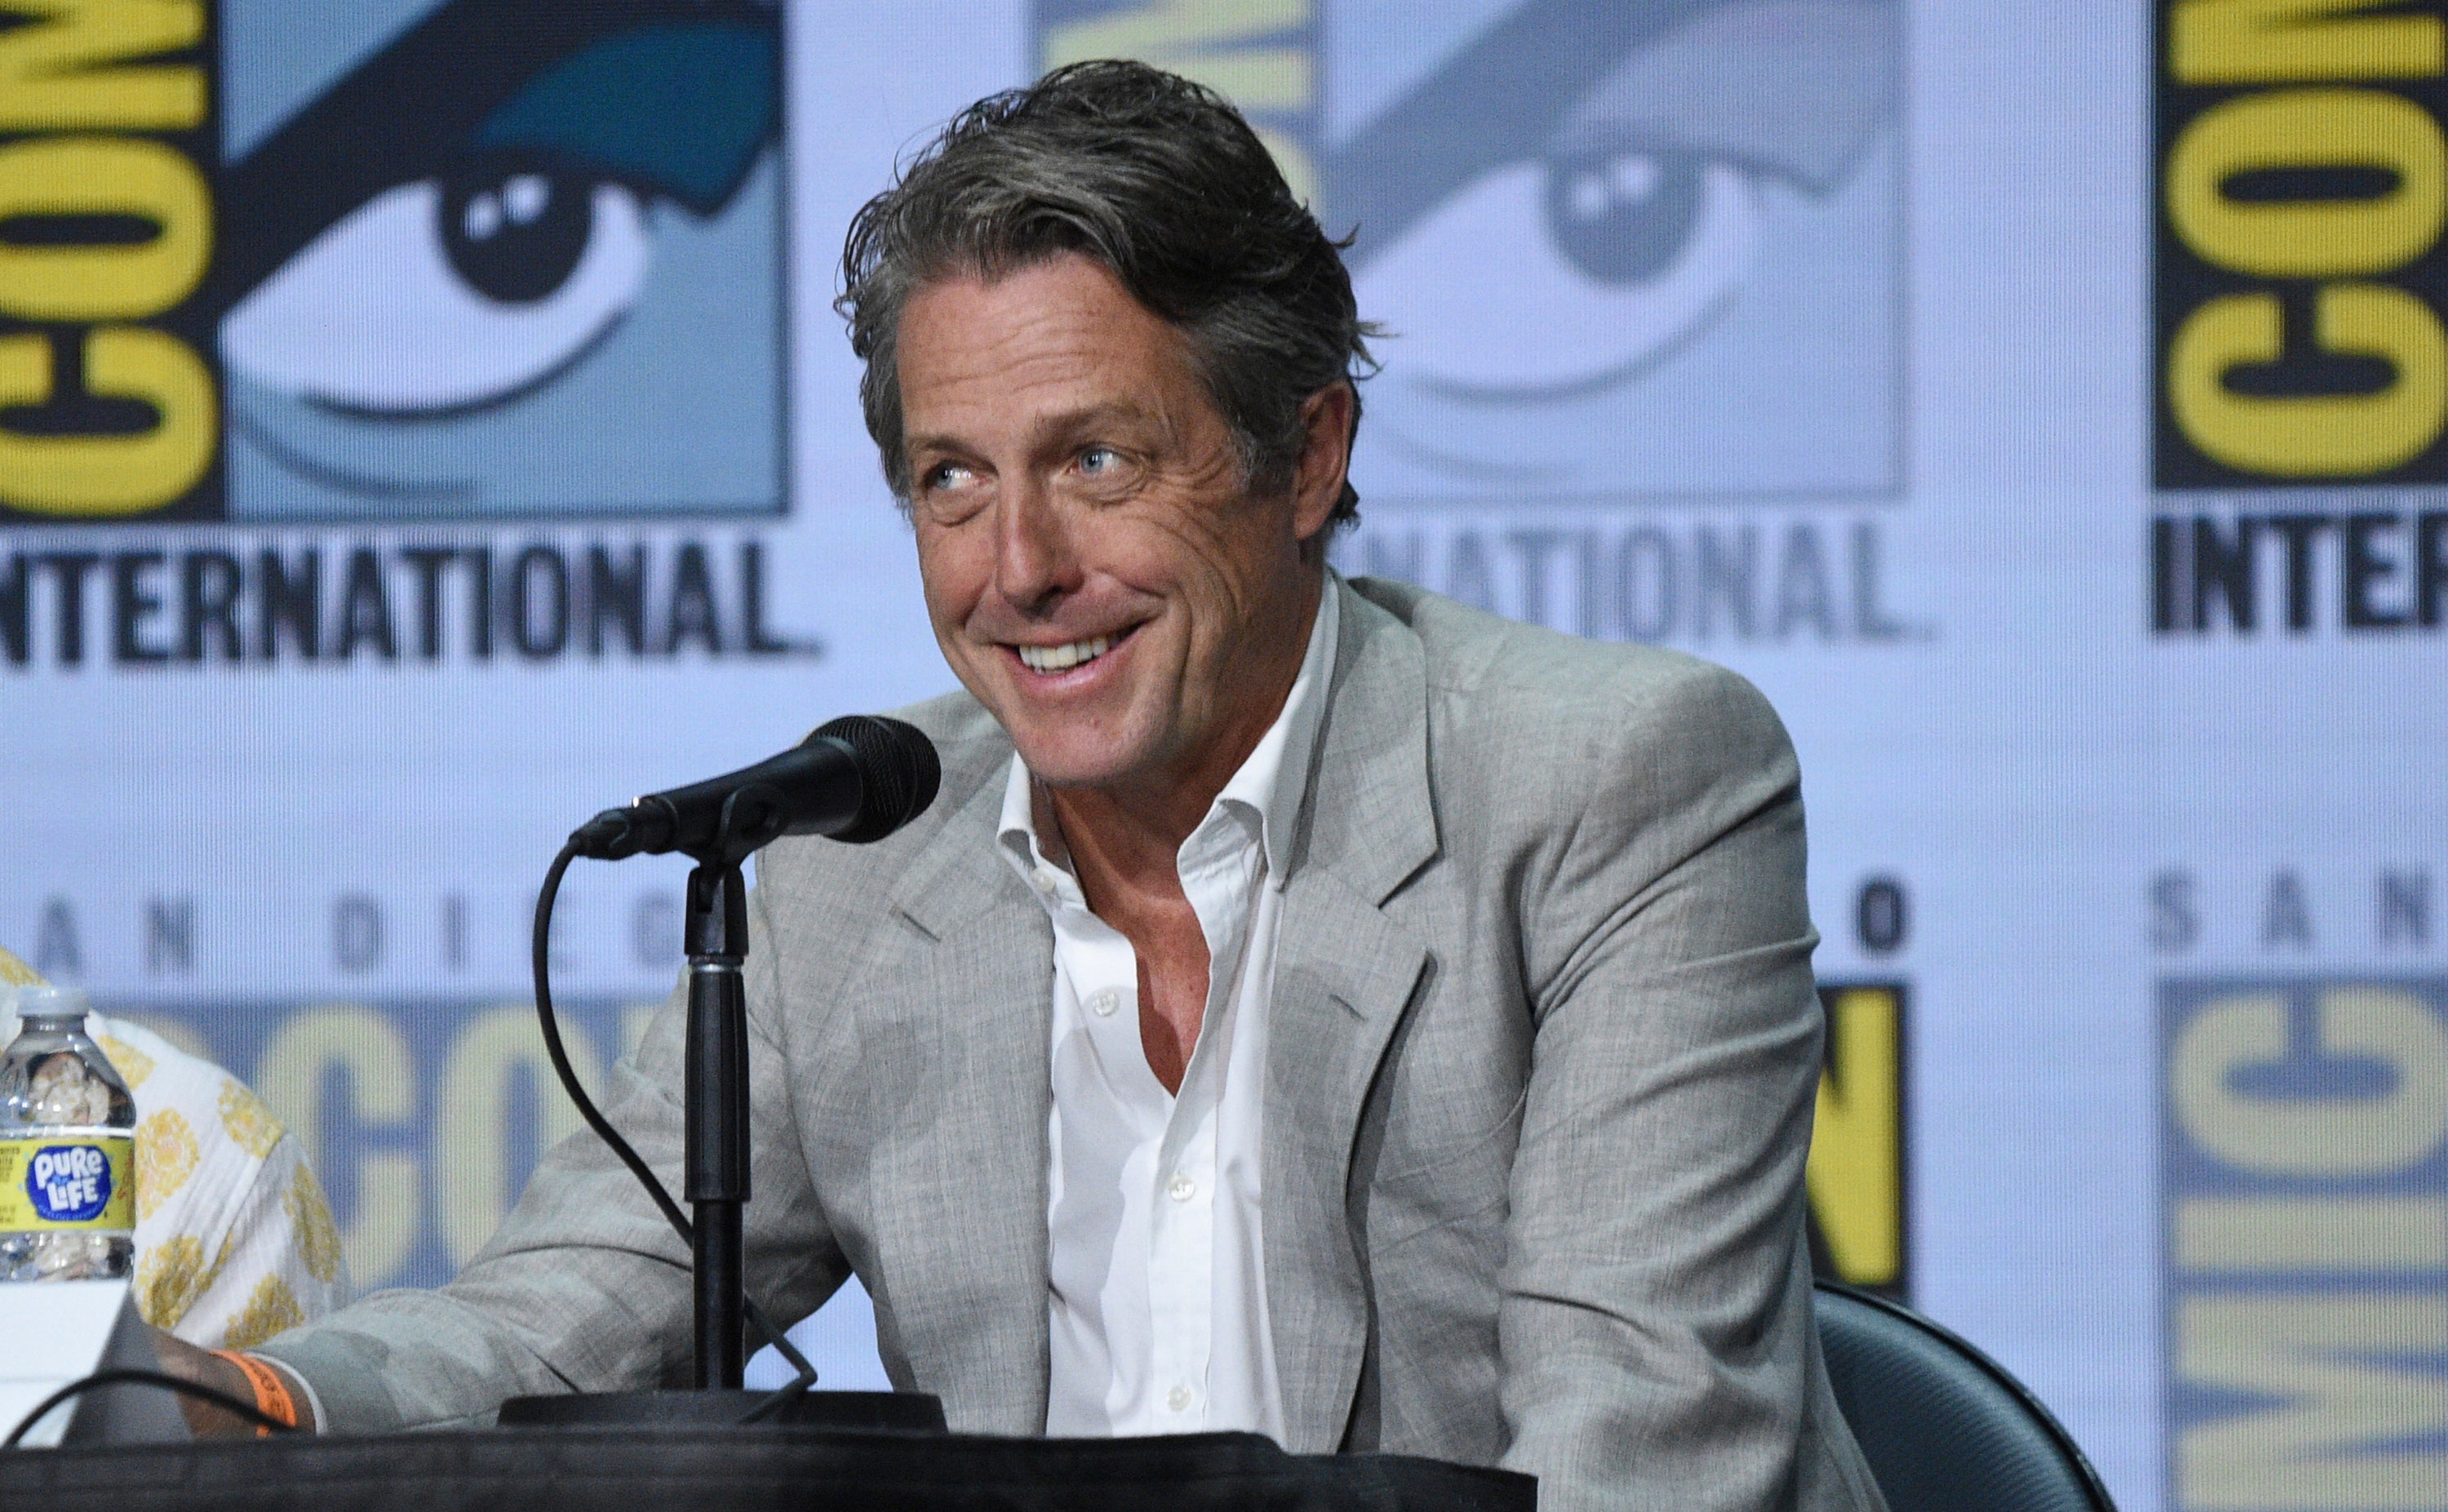 Hugh Grant has claimed to have upset former co-stars before